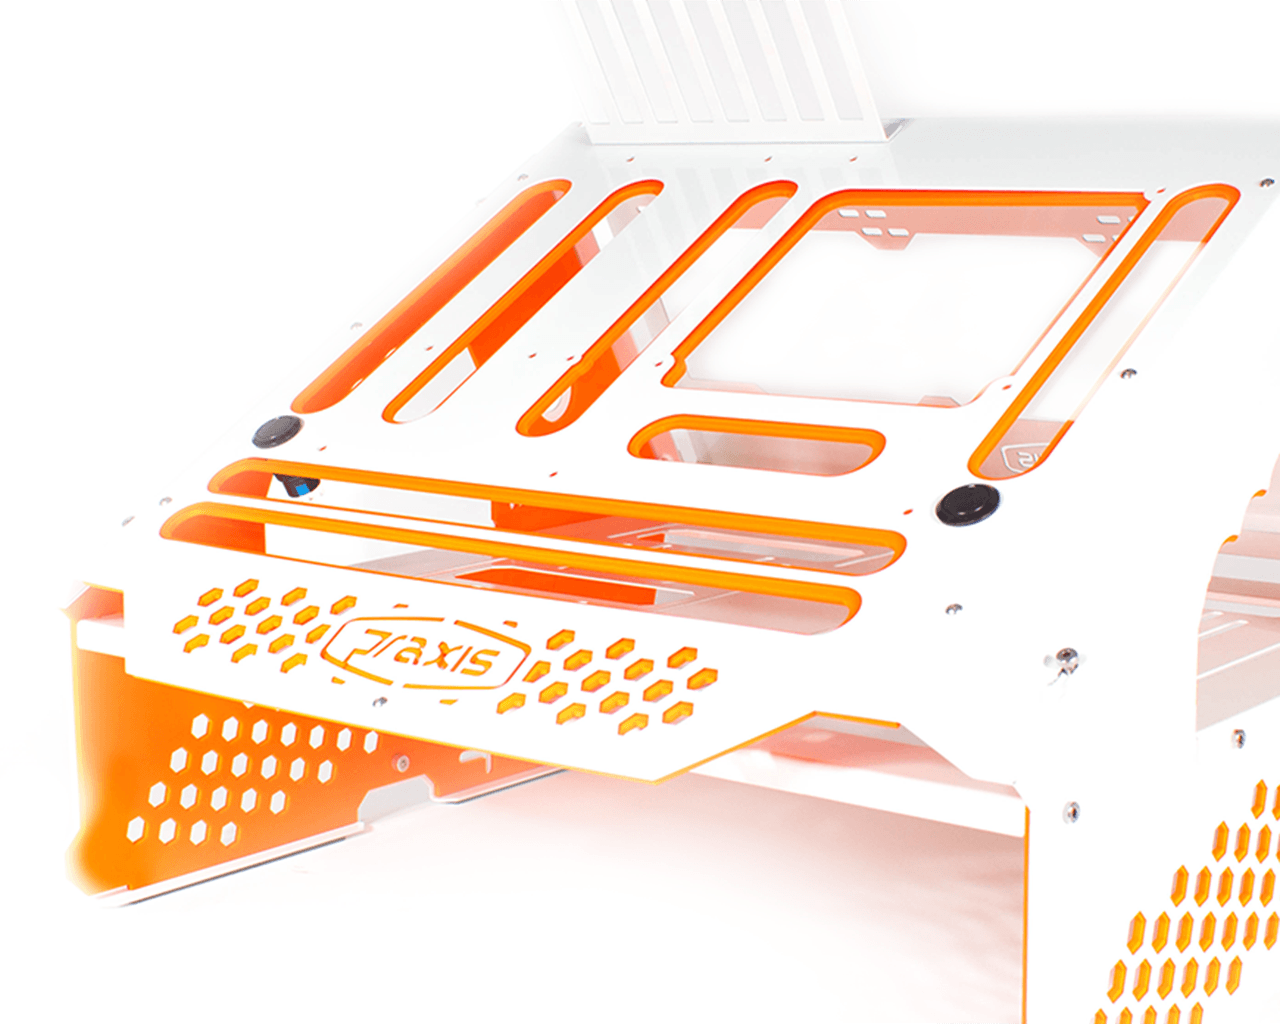 Praxis WetBench Accent Kit - Solid Orange PMMA - PrimoChill - KEEPING IT COOL